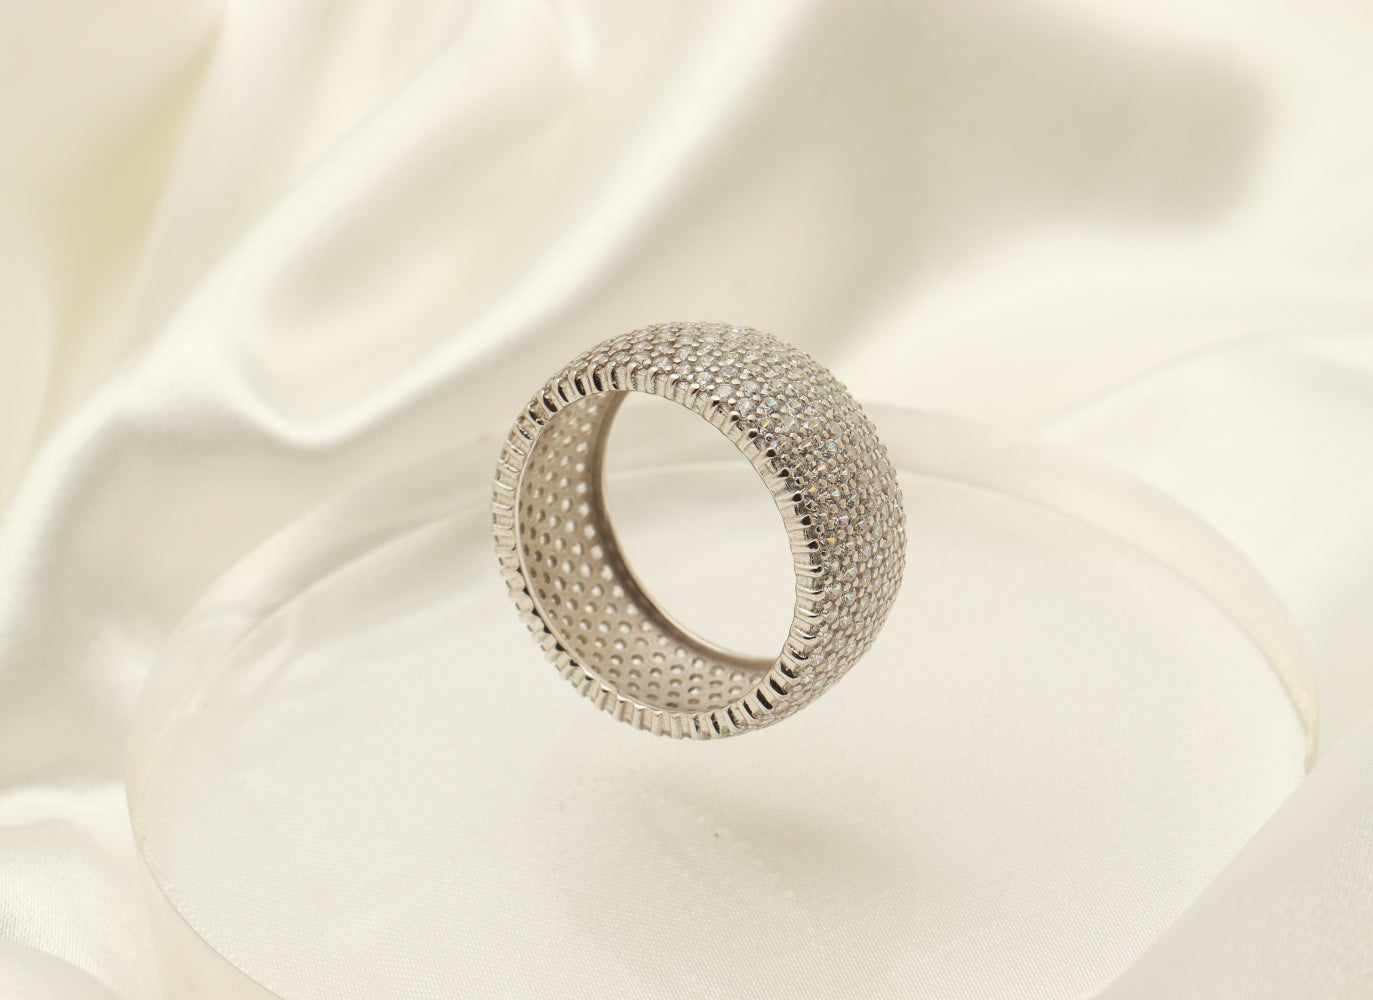 Silver 7 Row Micro-Pave Eternity Ring